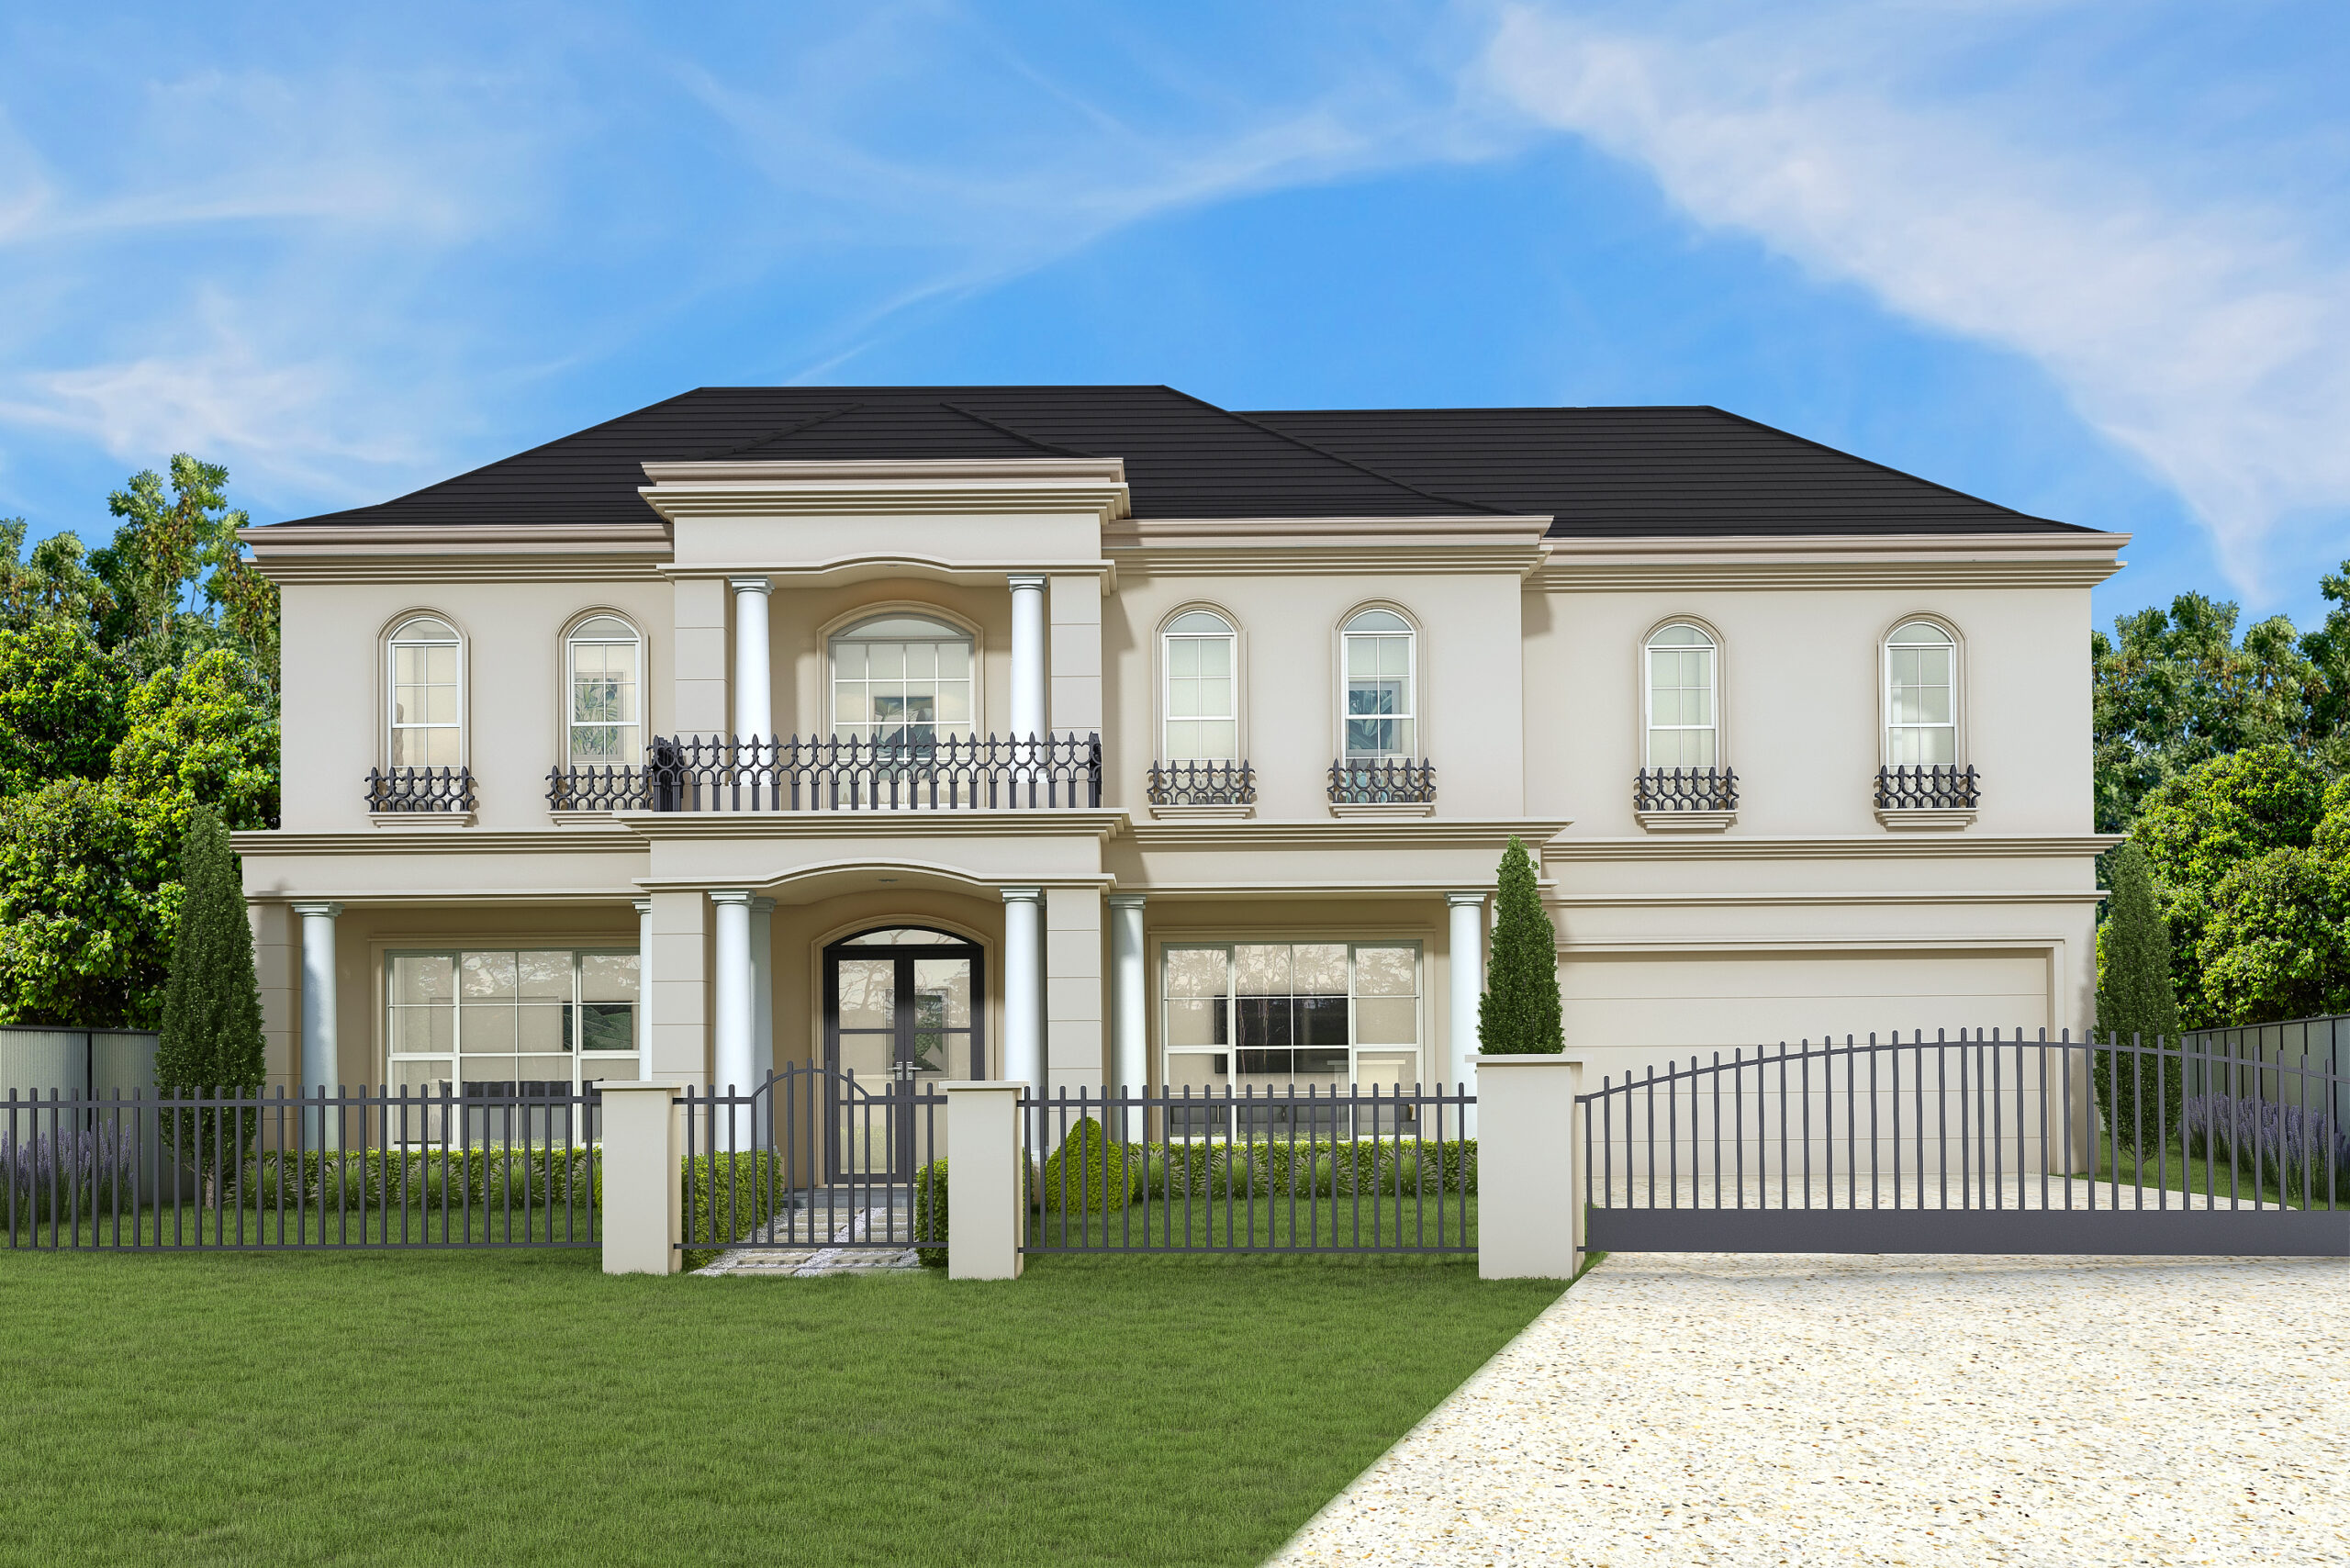 Render of a French Provincial style home in Gledswood Hills